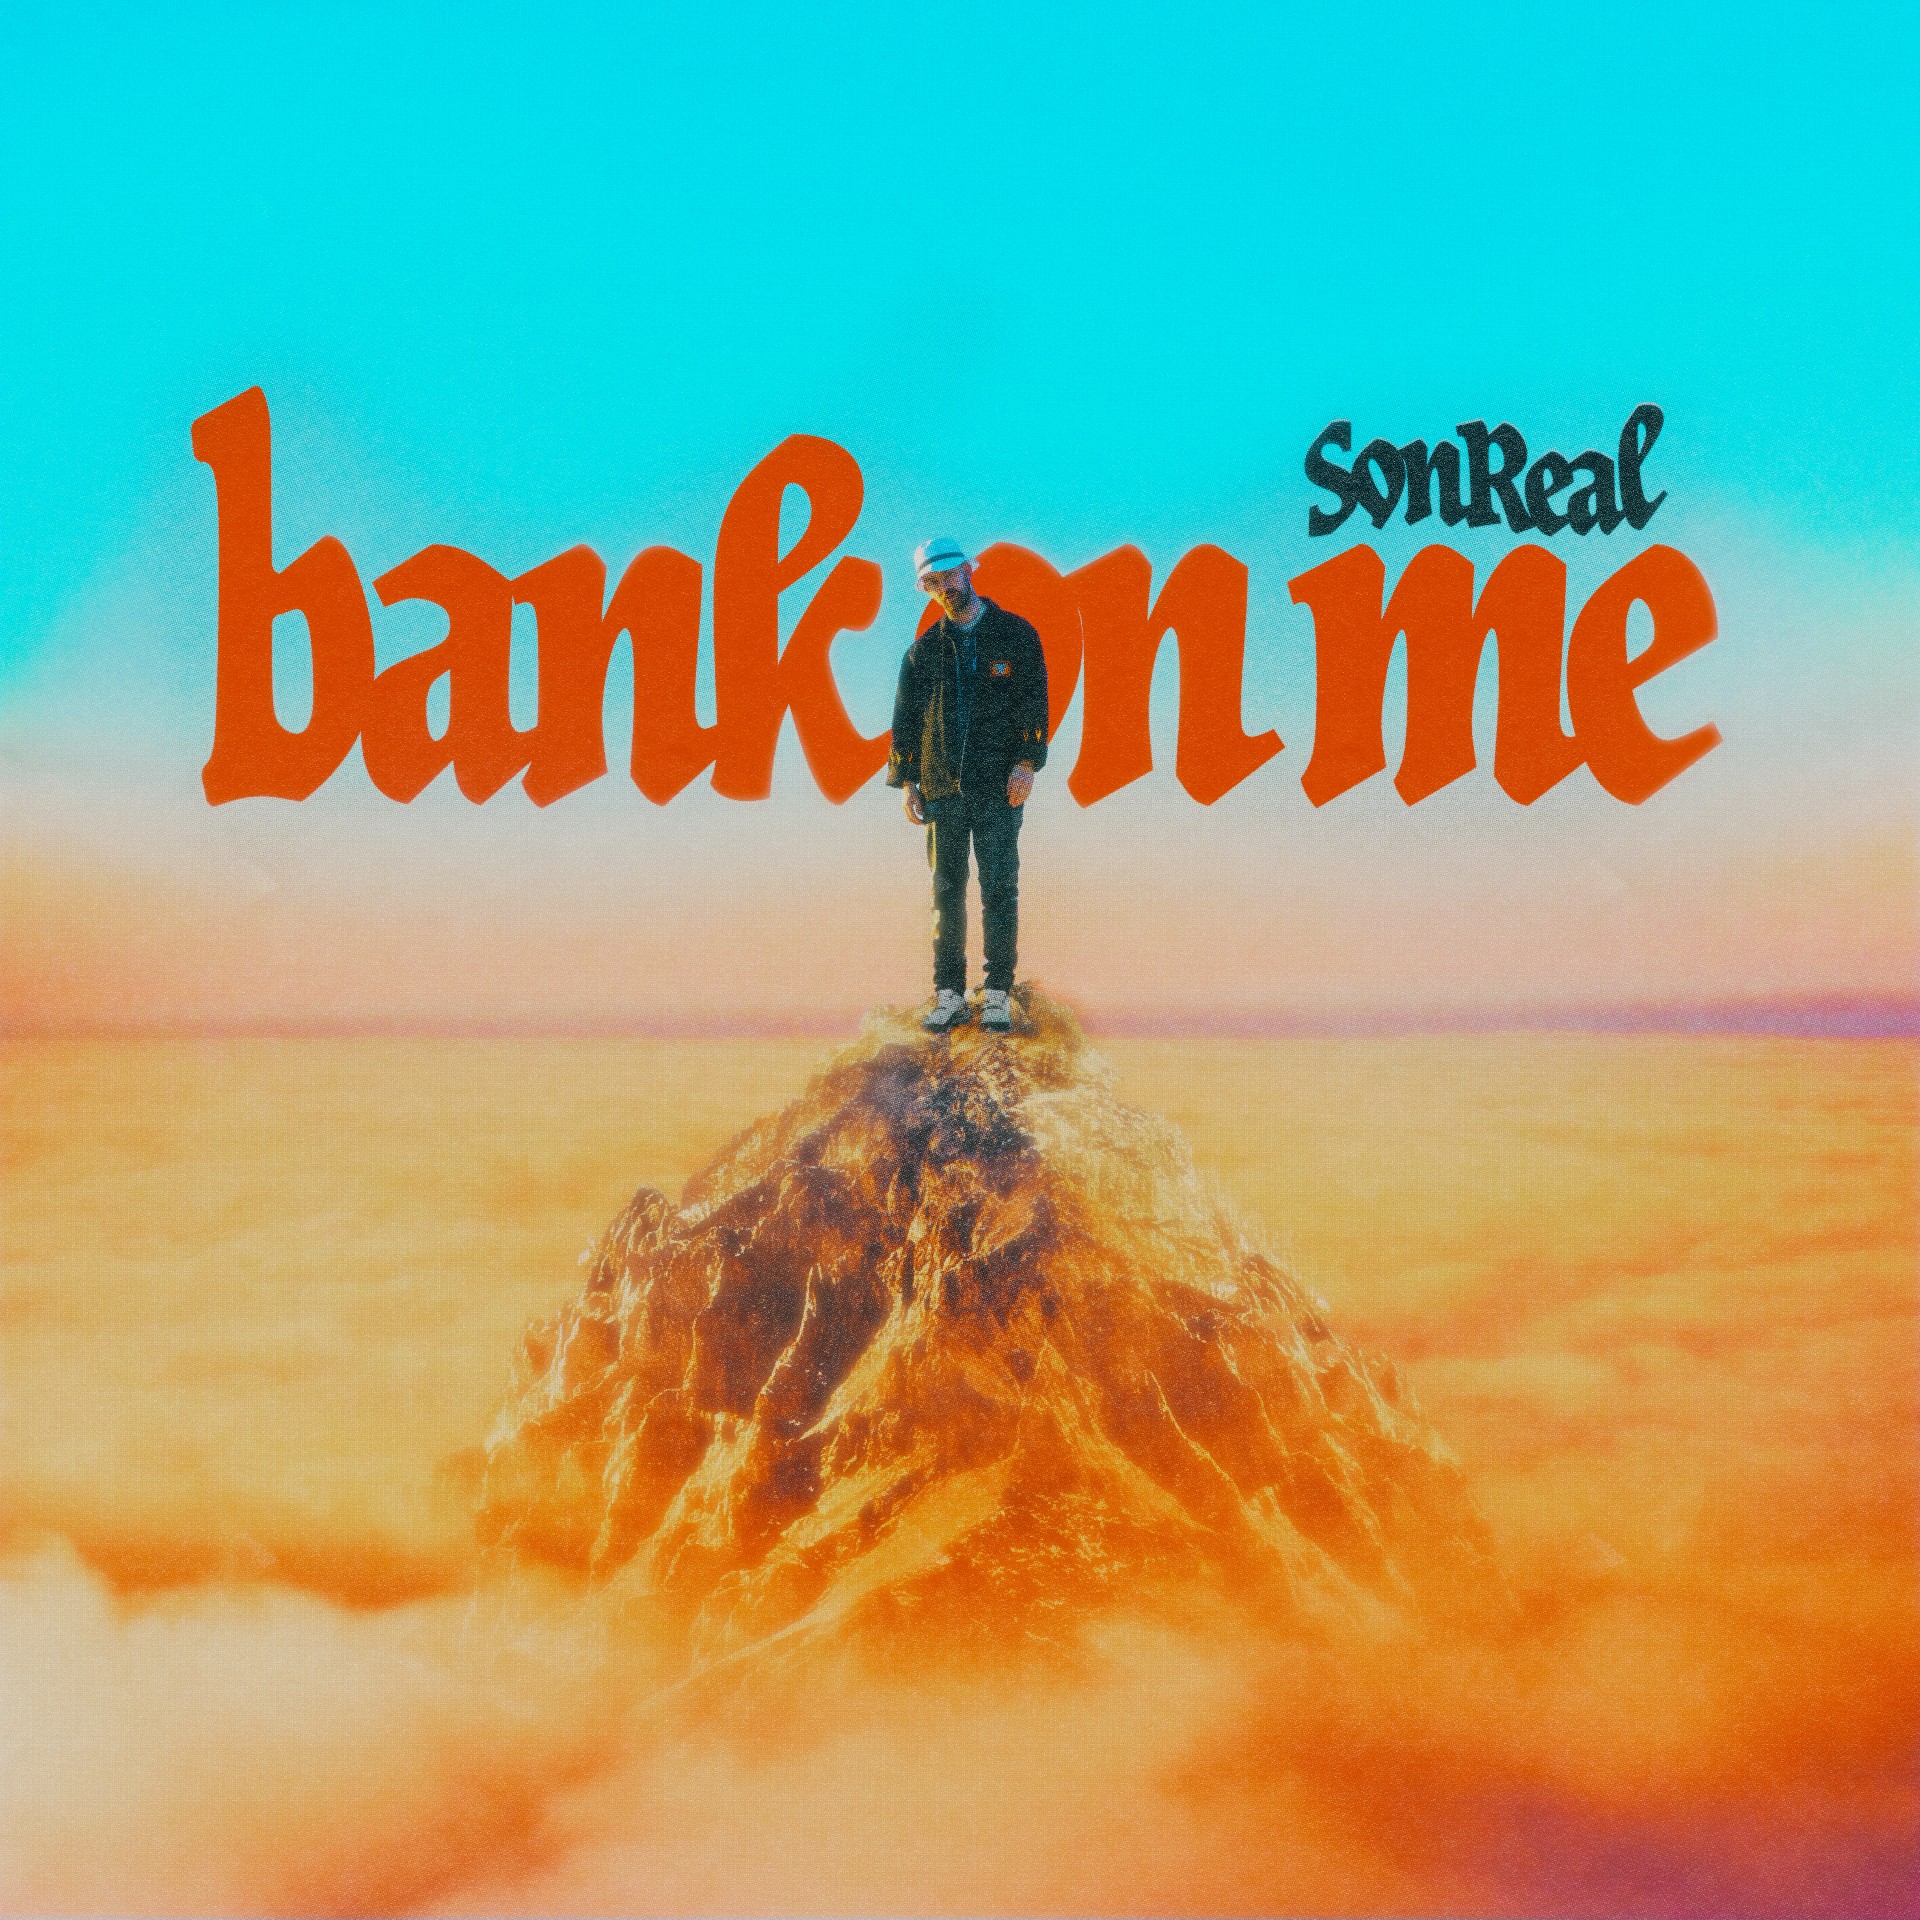 Listen to “Bank On Me,” SonReal’s Track About Betting on Yourself